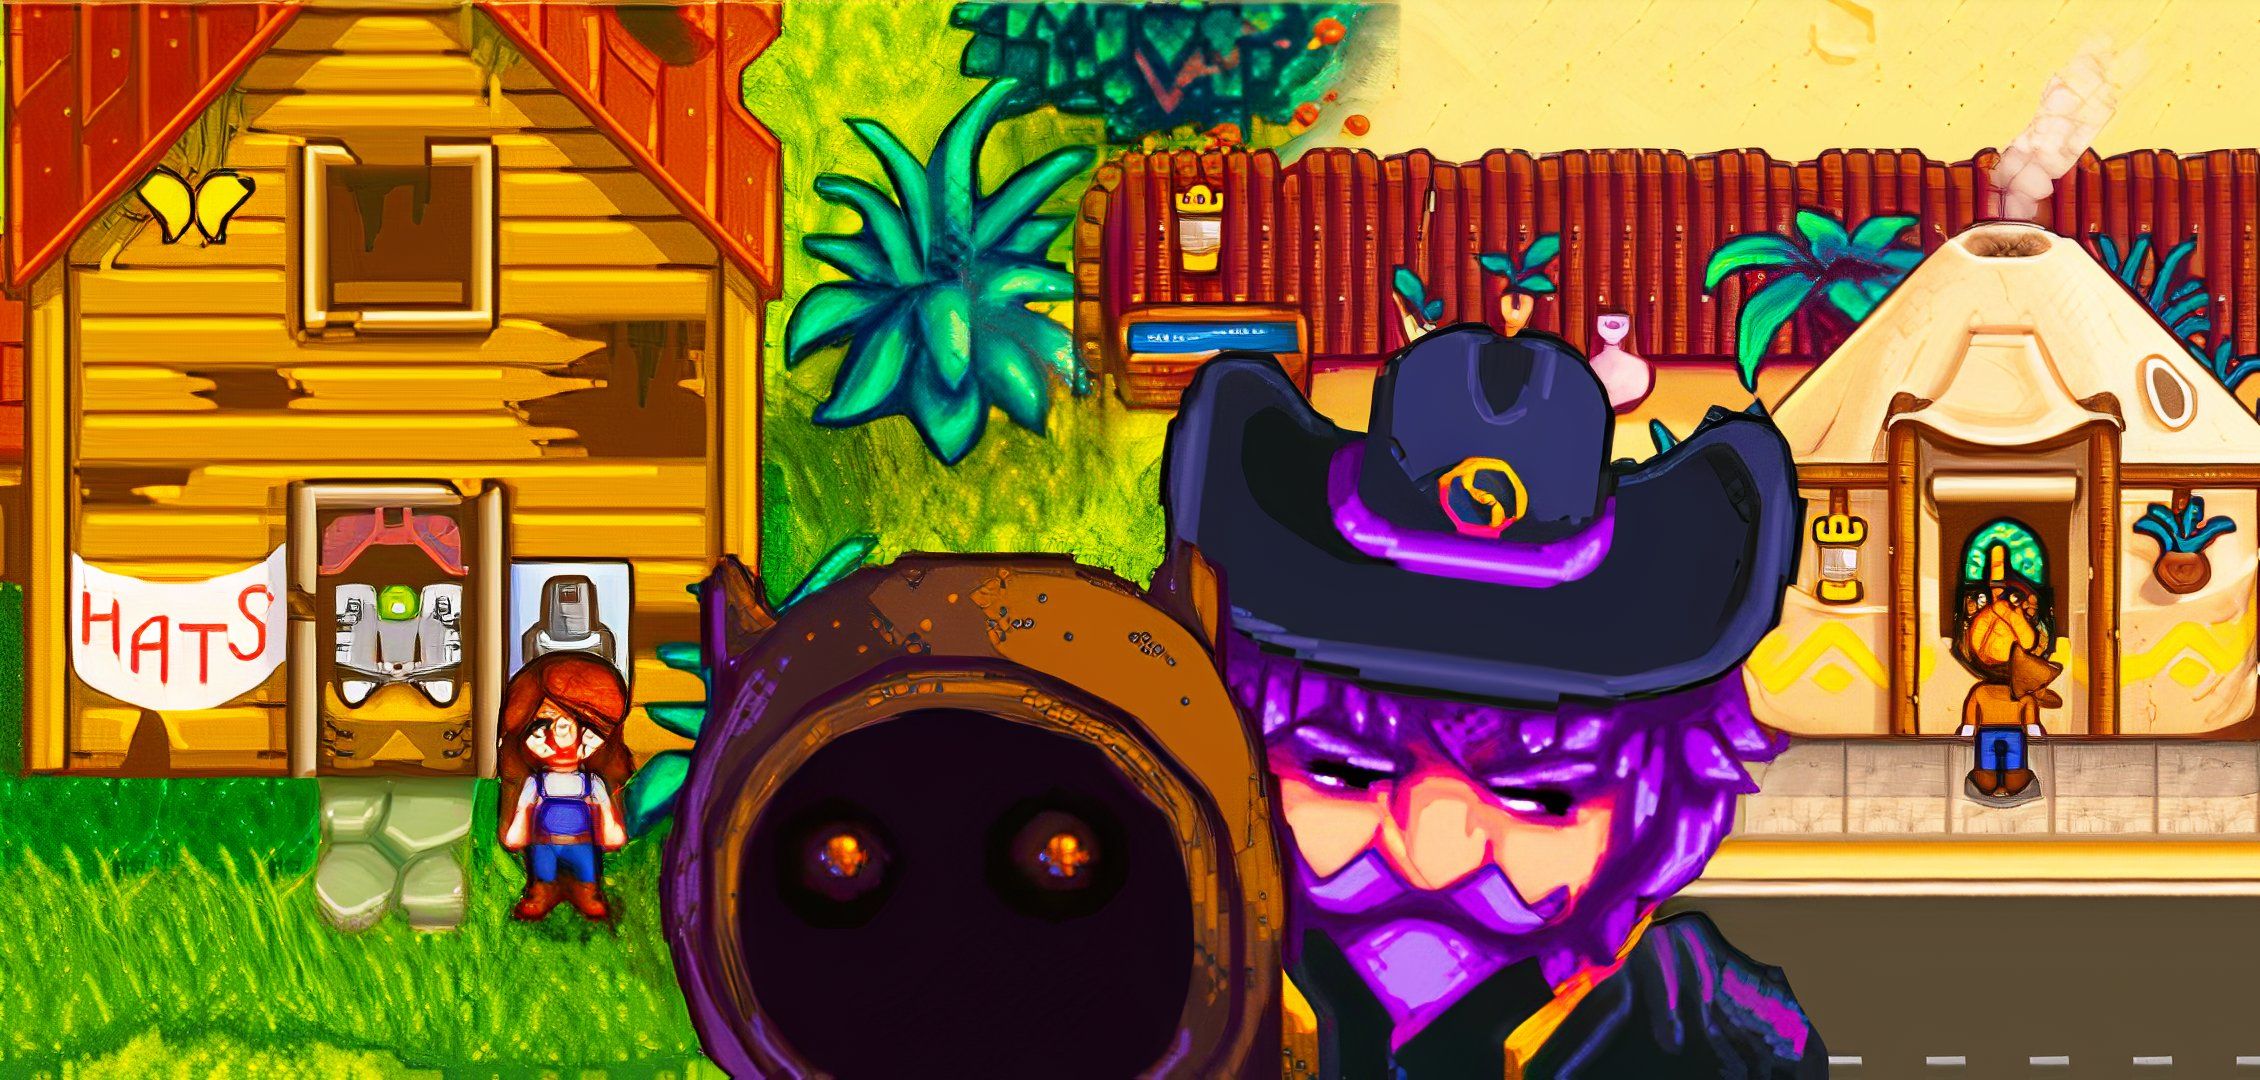 The wizard and the dwarf from Stardew Valley, with the Desert Trader and Hat Mouse.